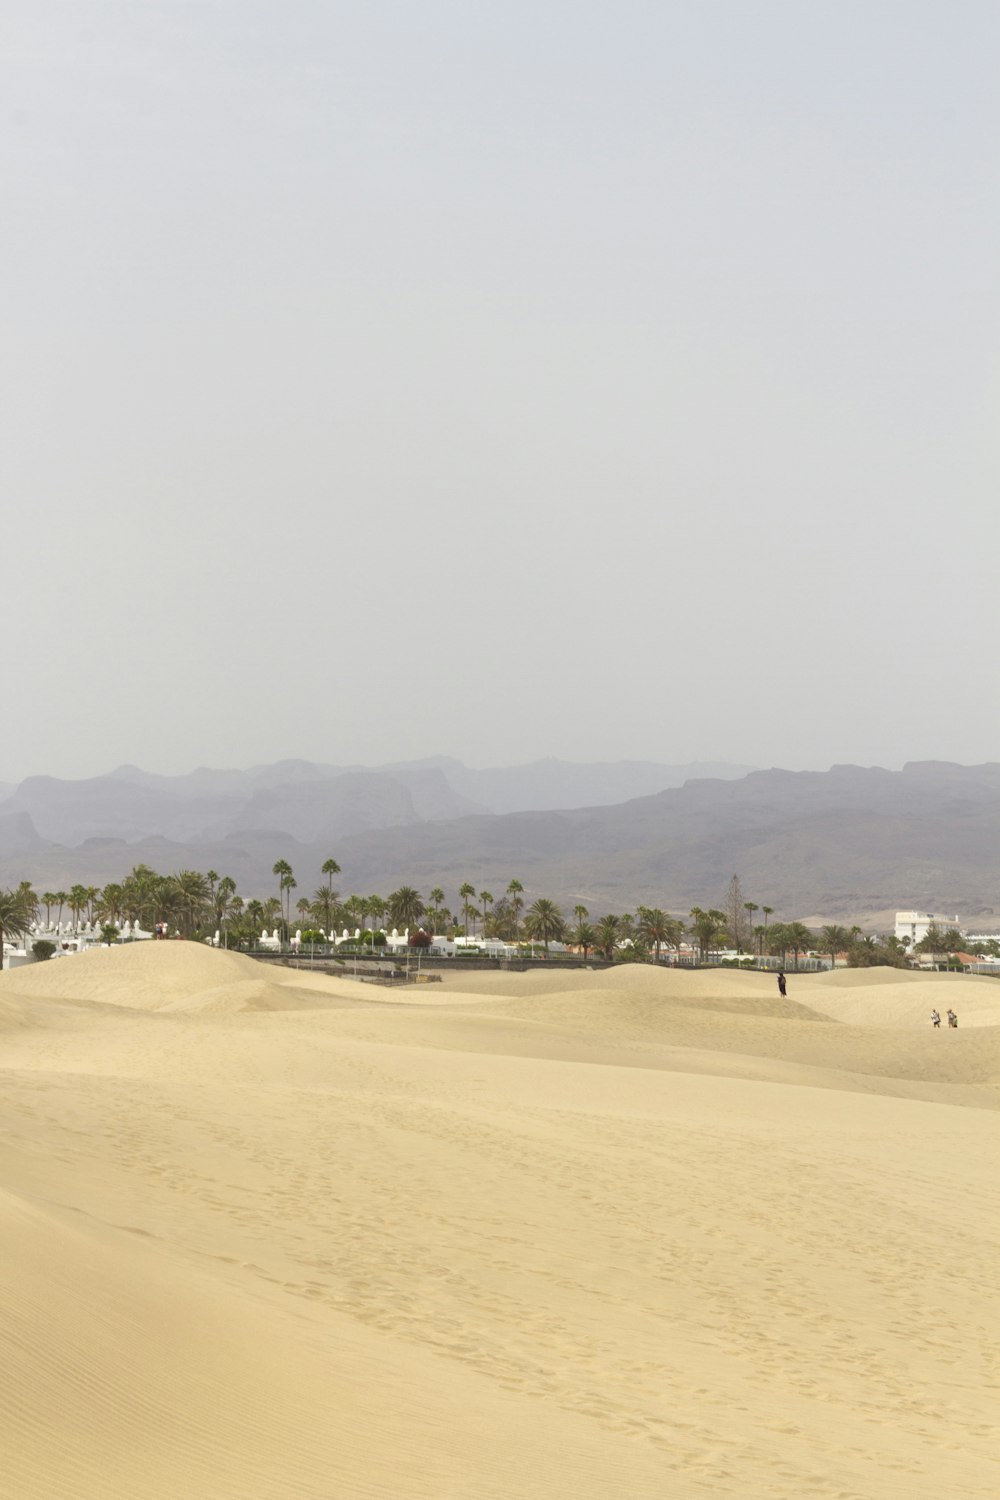 a sandy area with trees in the background